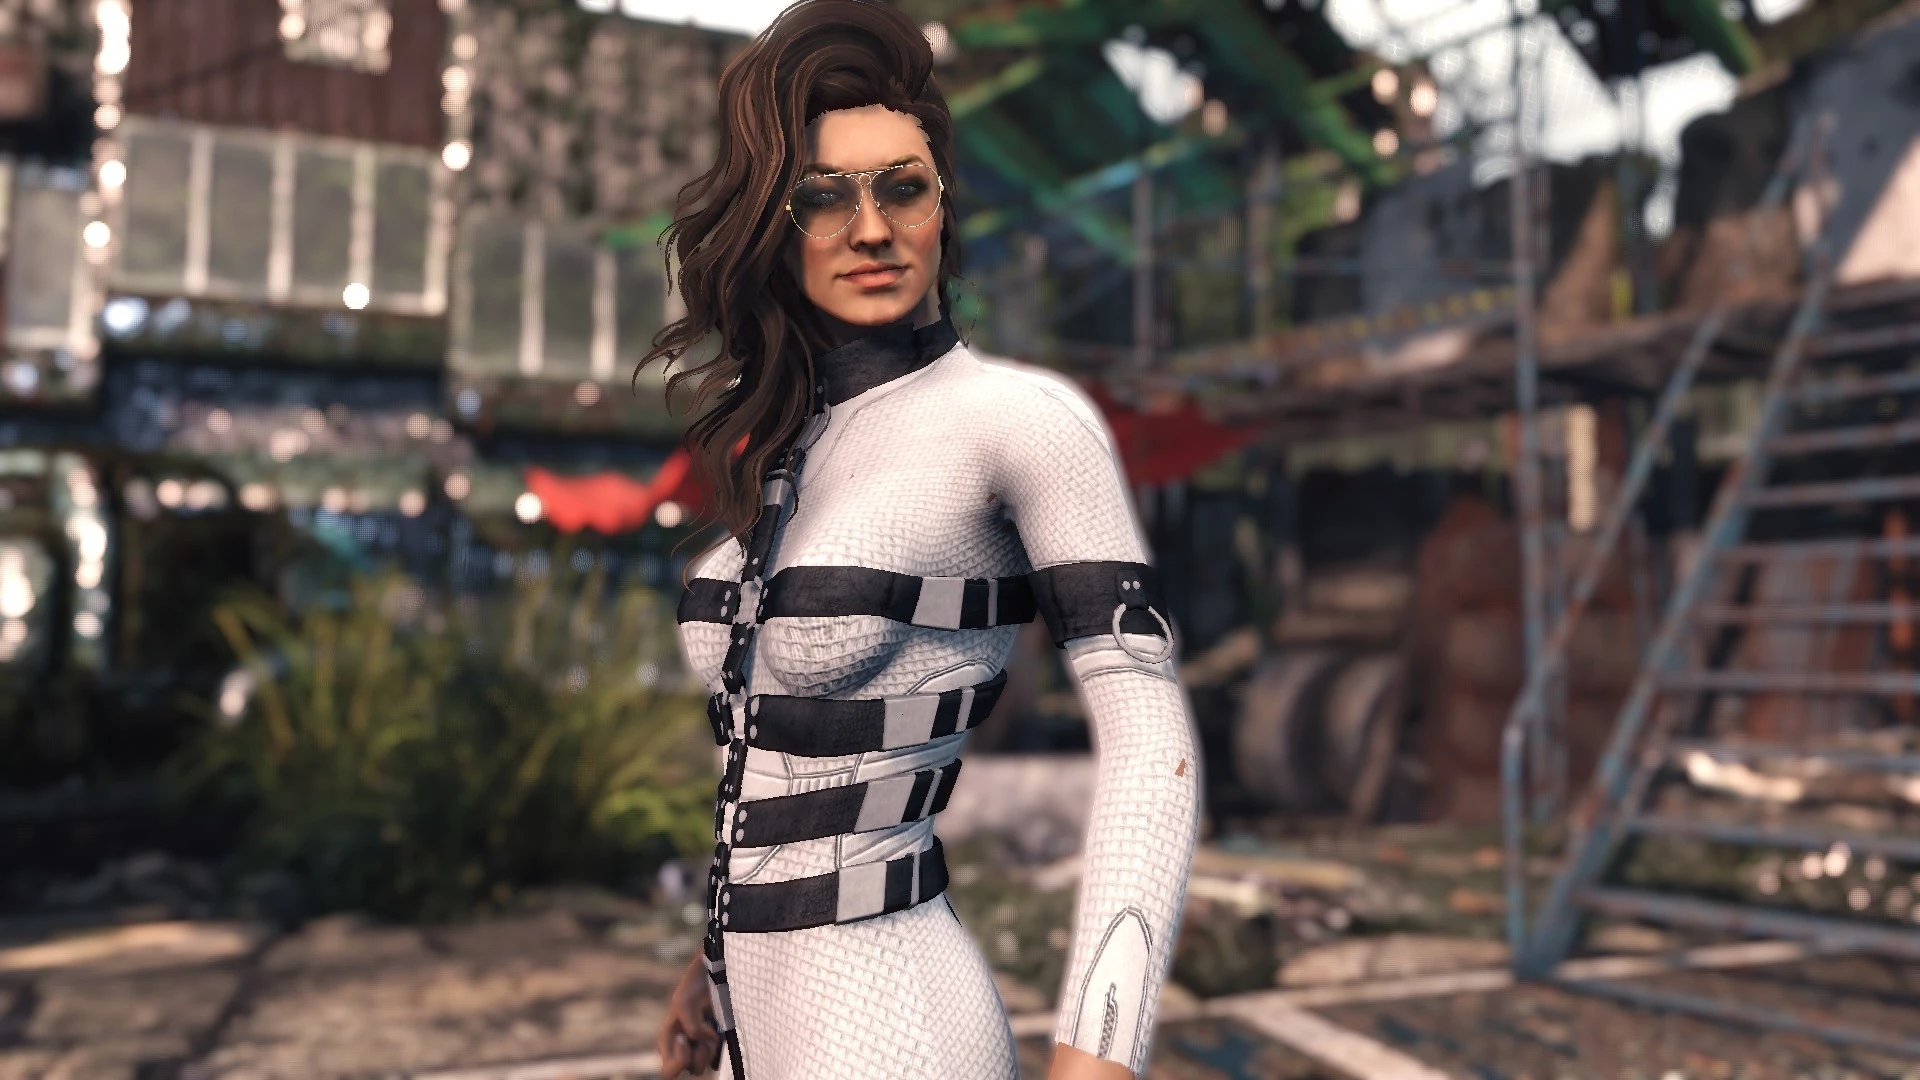 Fo4edit. Fallout 4 Catsuit. Fallout 4 Bodyslide пути к игре. Girls and g Mod game.